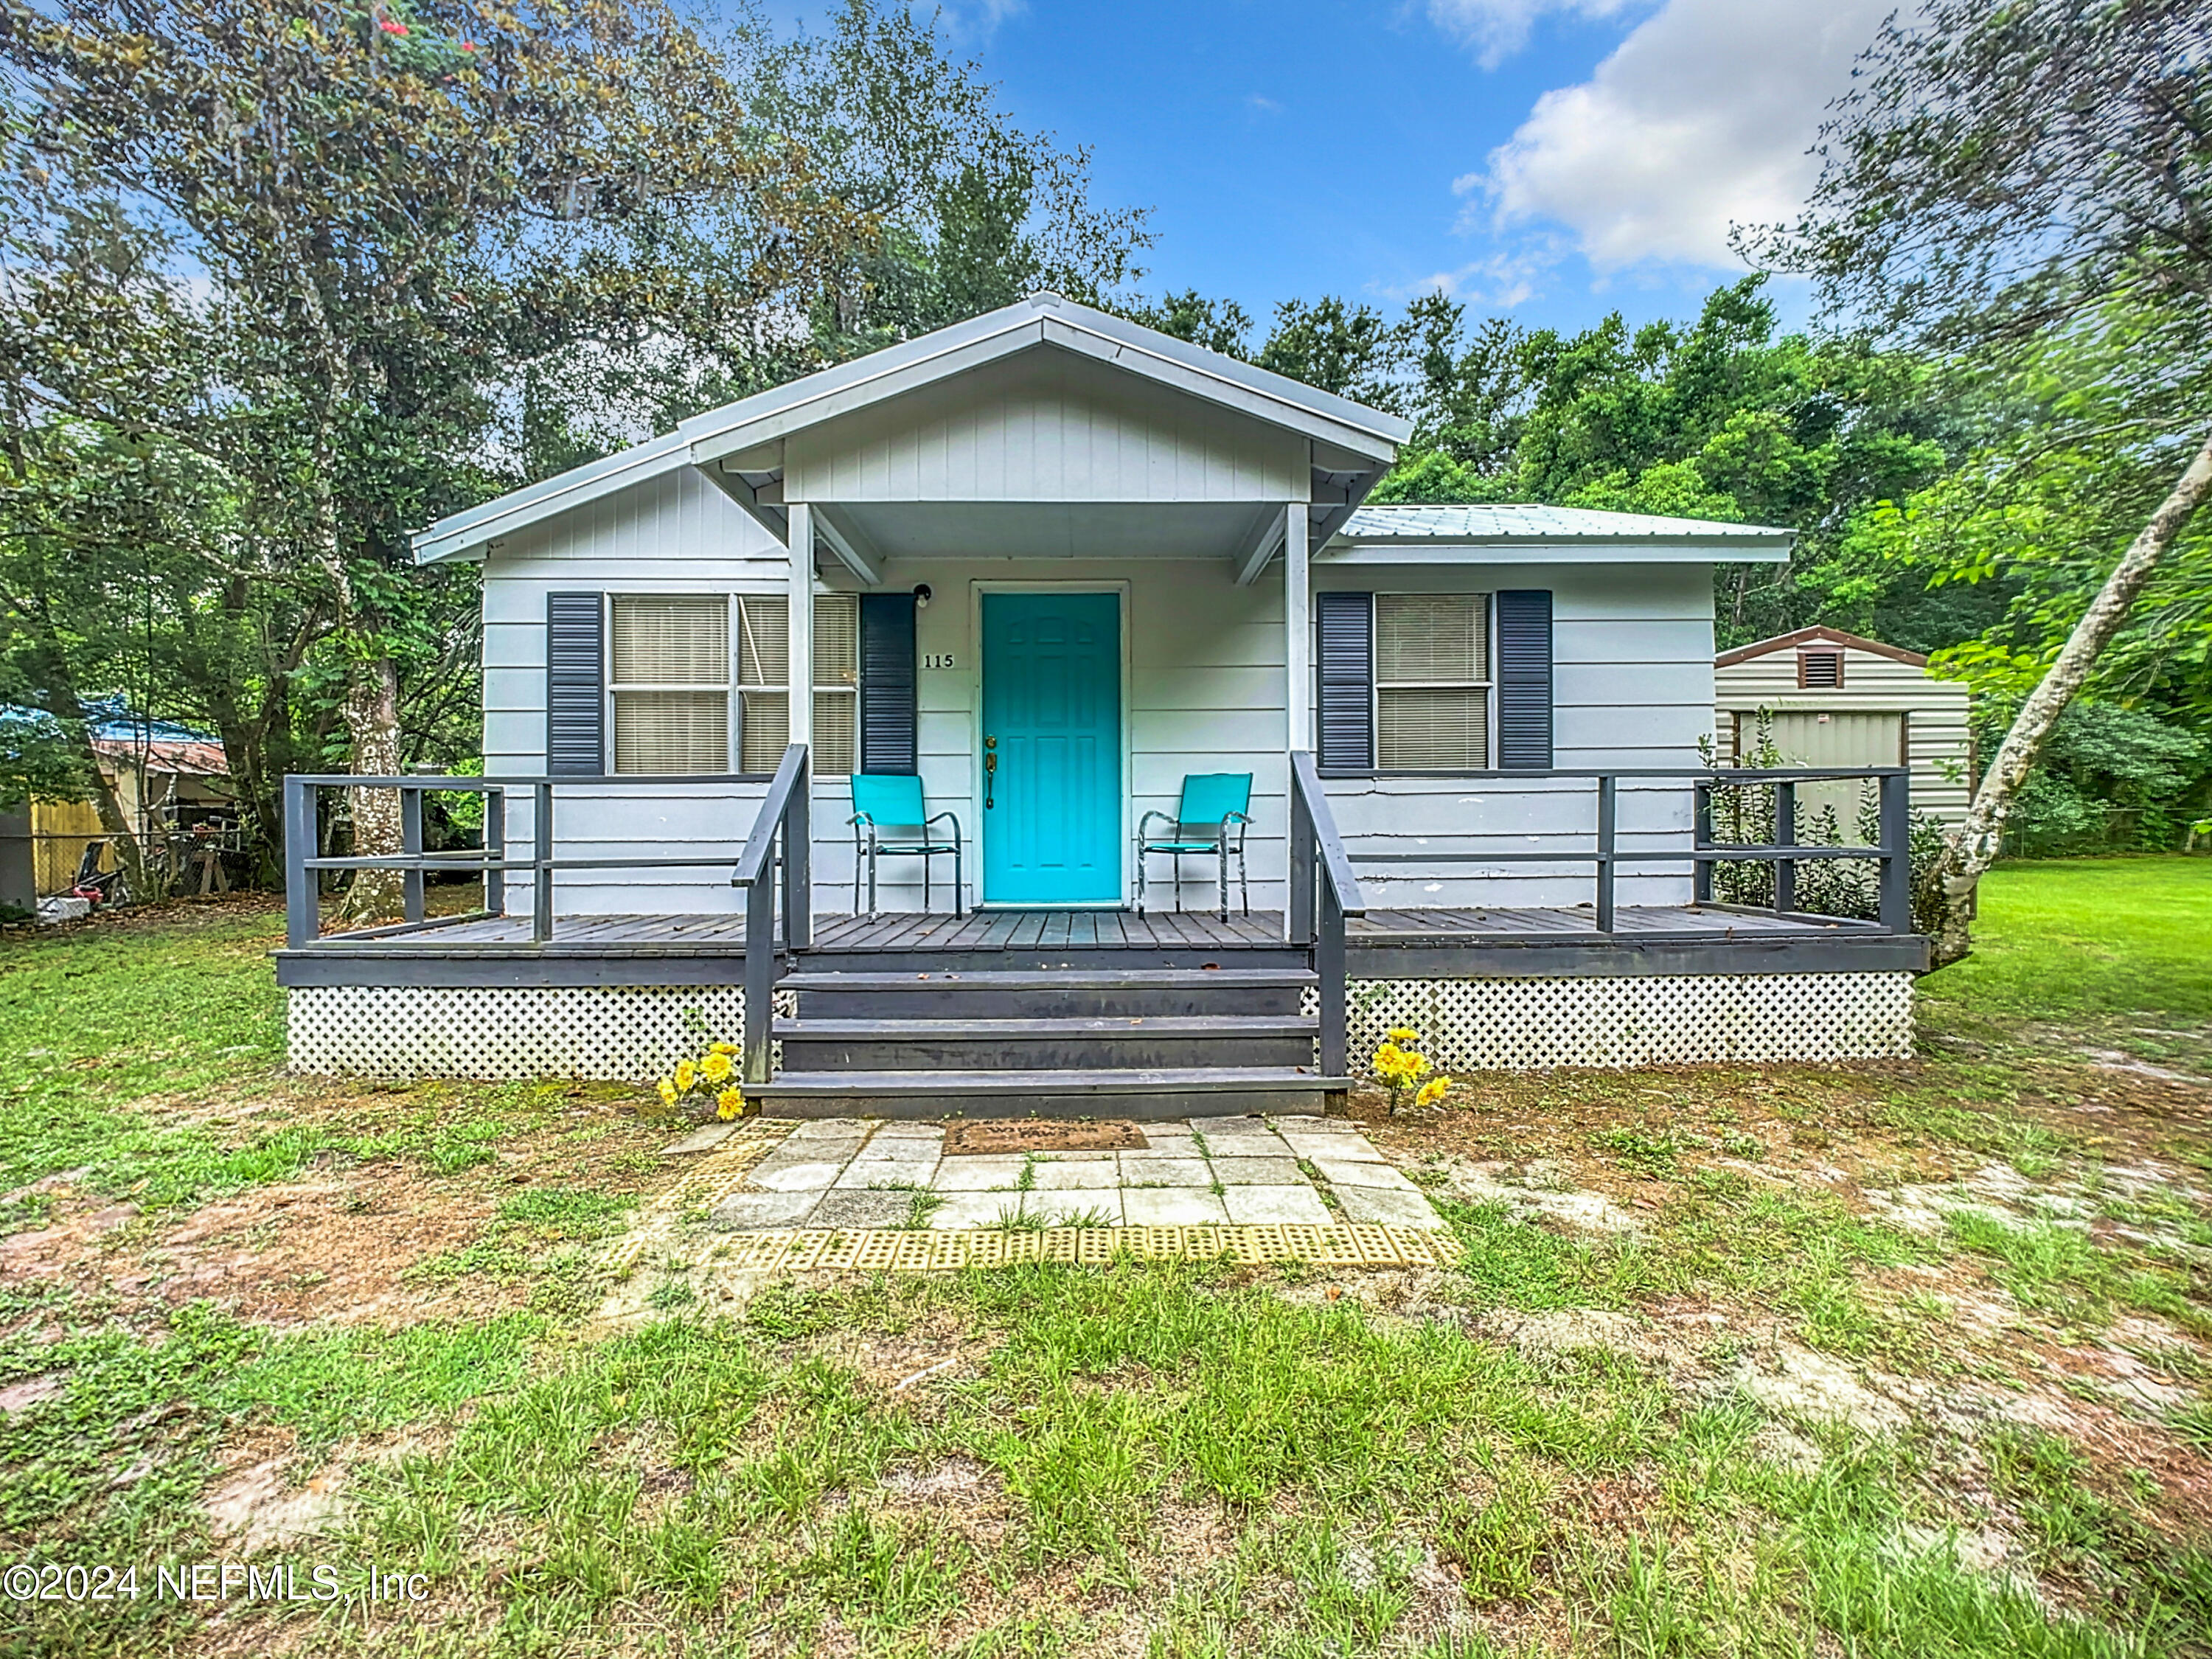 Crescent City, FL home for sale located at 113 Char Lane, Crescent City, FL 32112